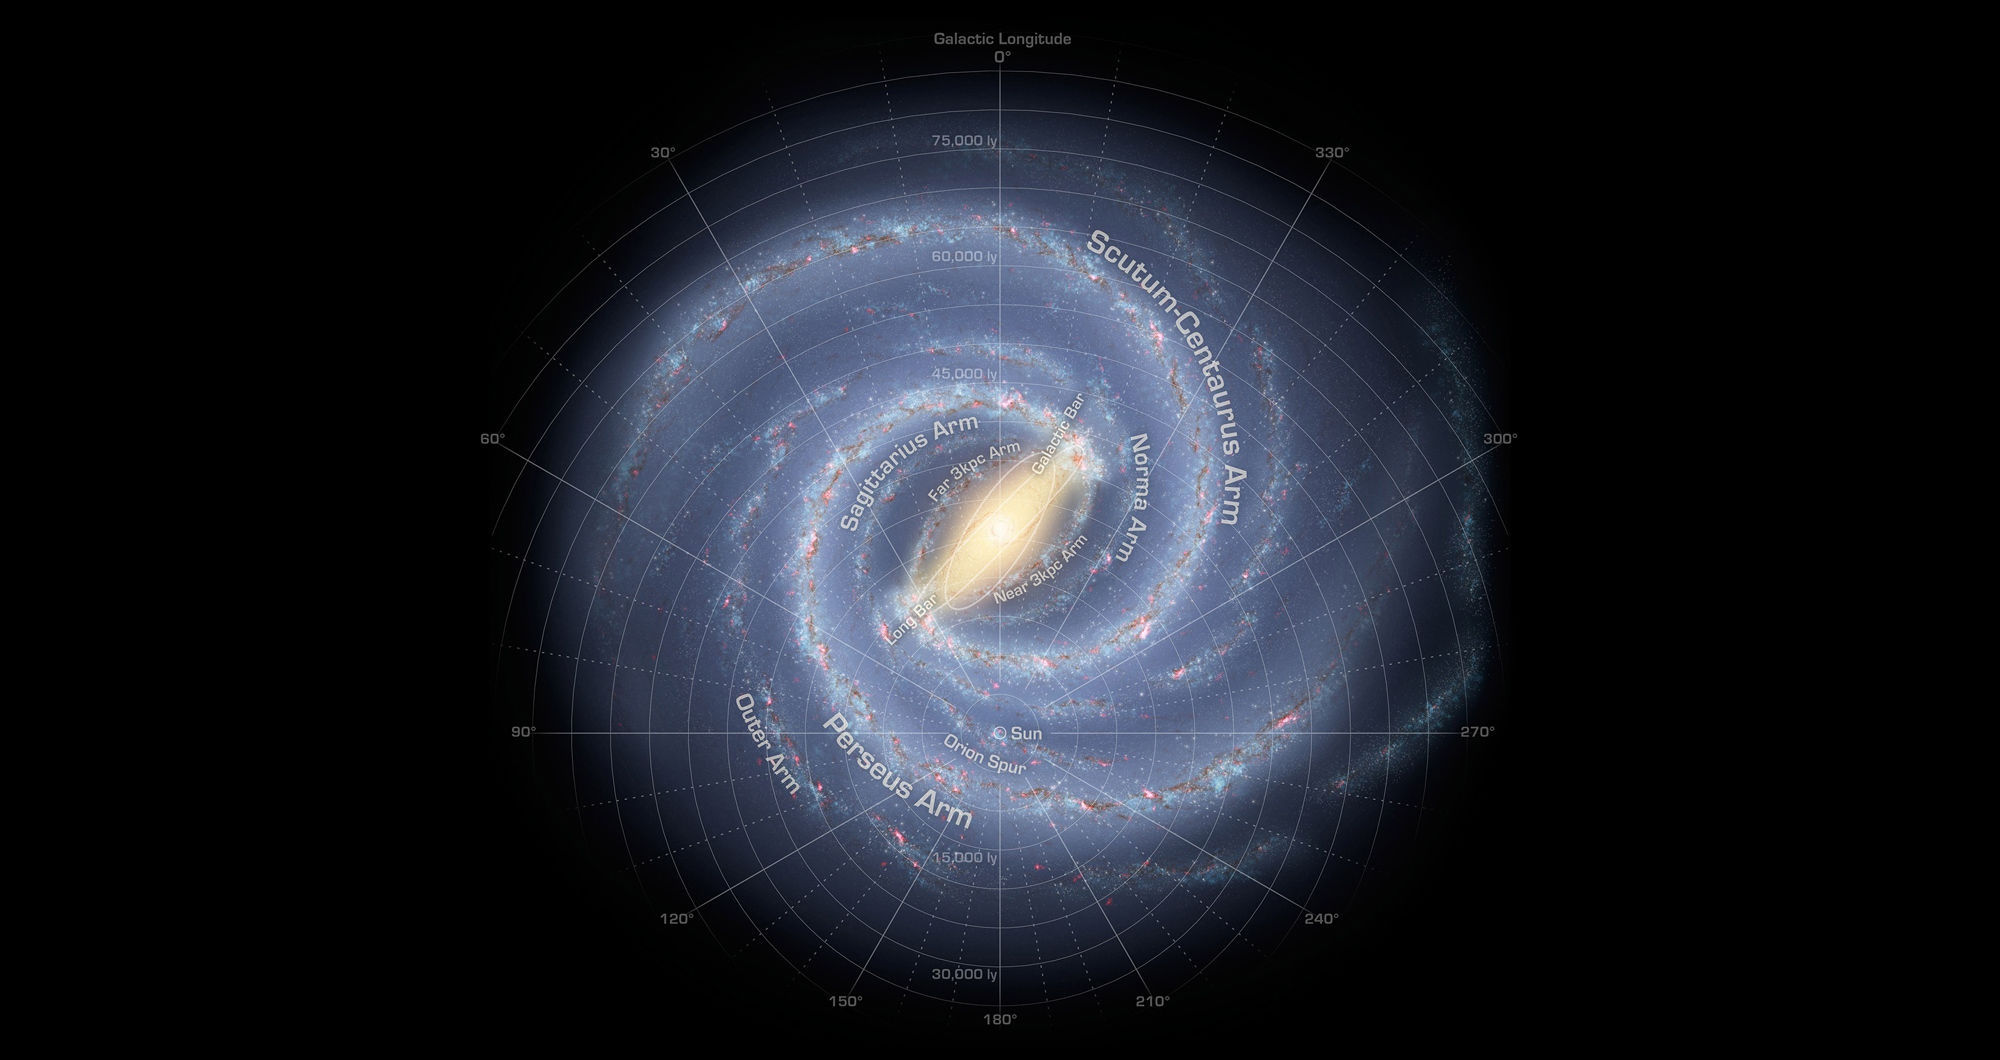 The most current map of the Milky Way is shown in an artist’s representation. The Sun is directly below the galactic center, near the Orion Spur. The Scutum-Centaurus arms sweeps out to the right and above, going behind the center to the far side.